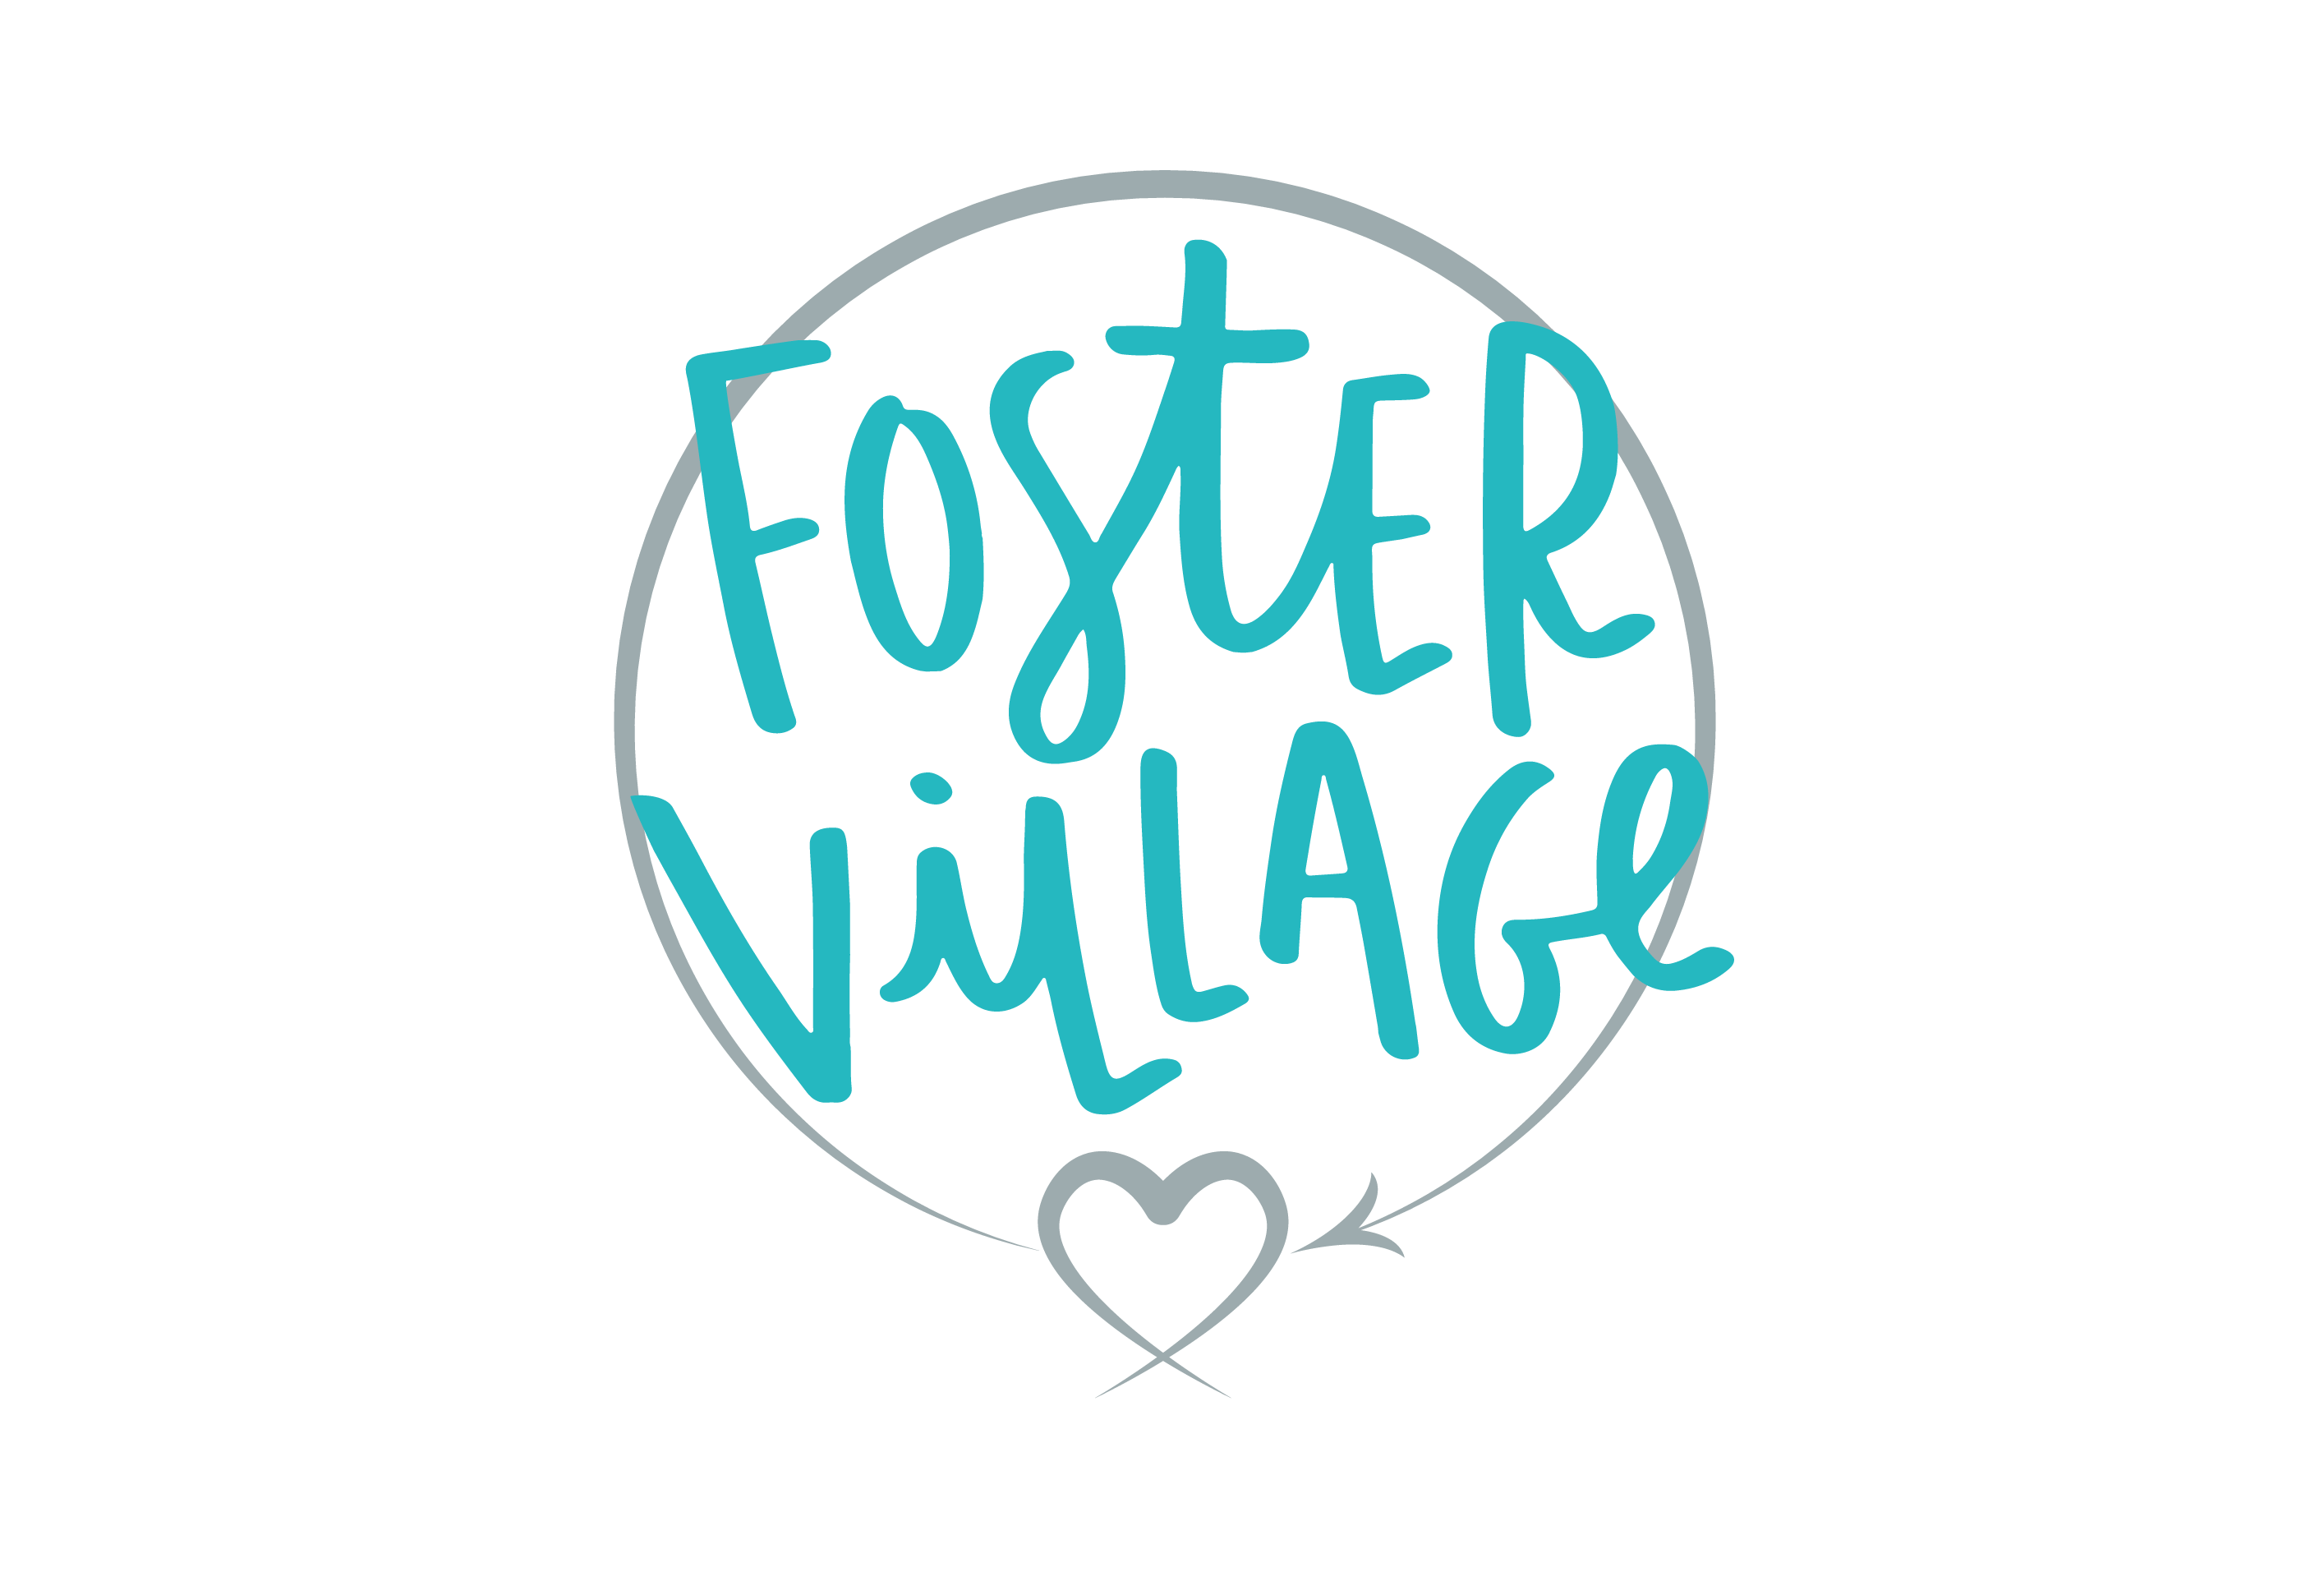 Foster Village teal with grey circle and heart